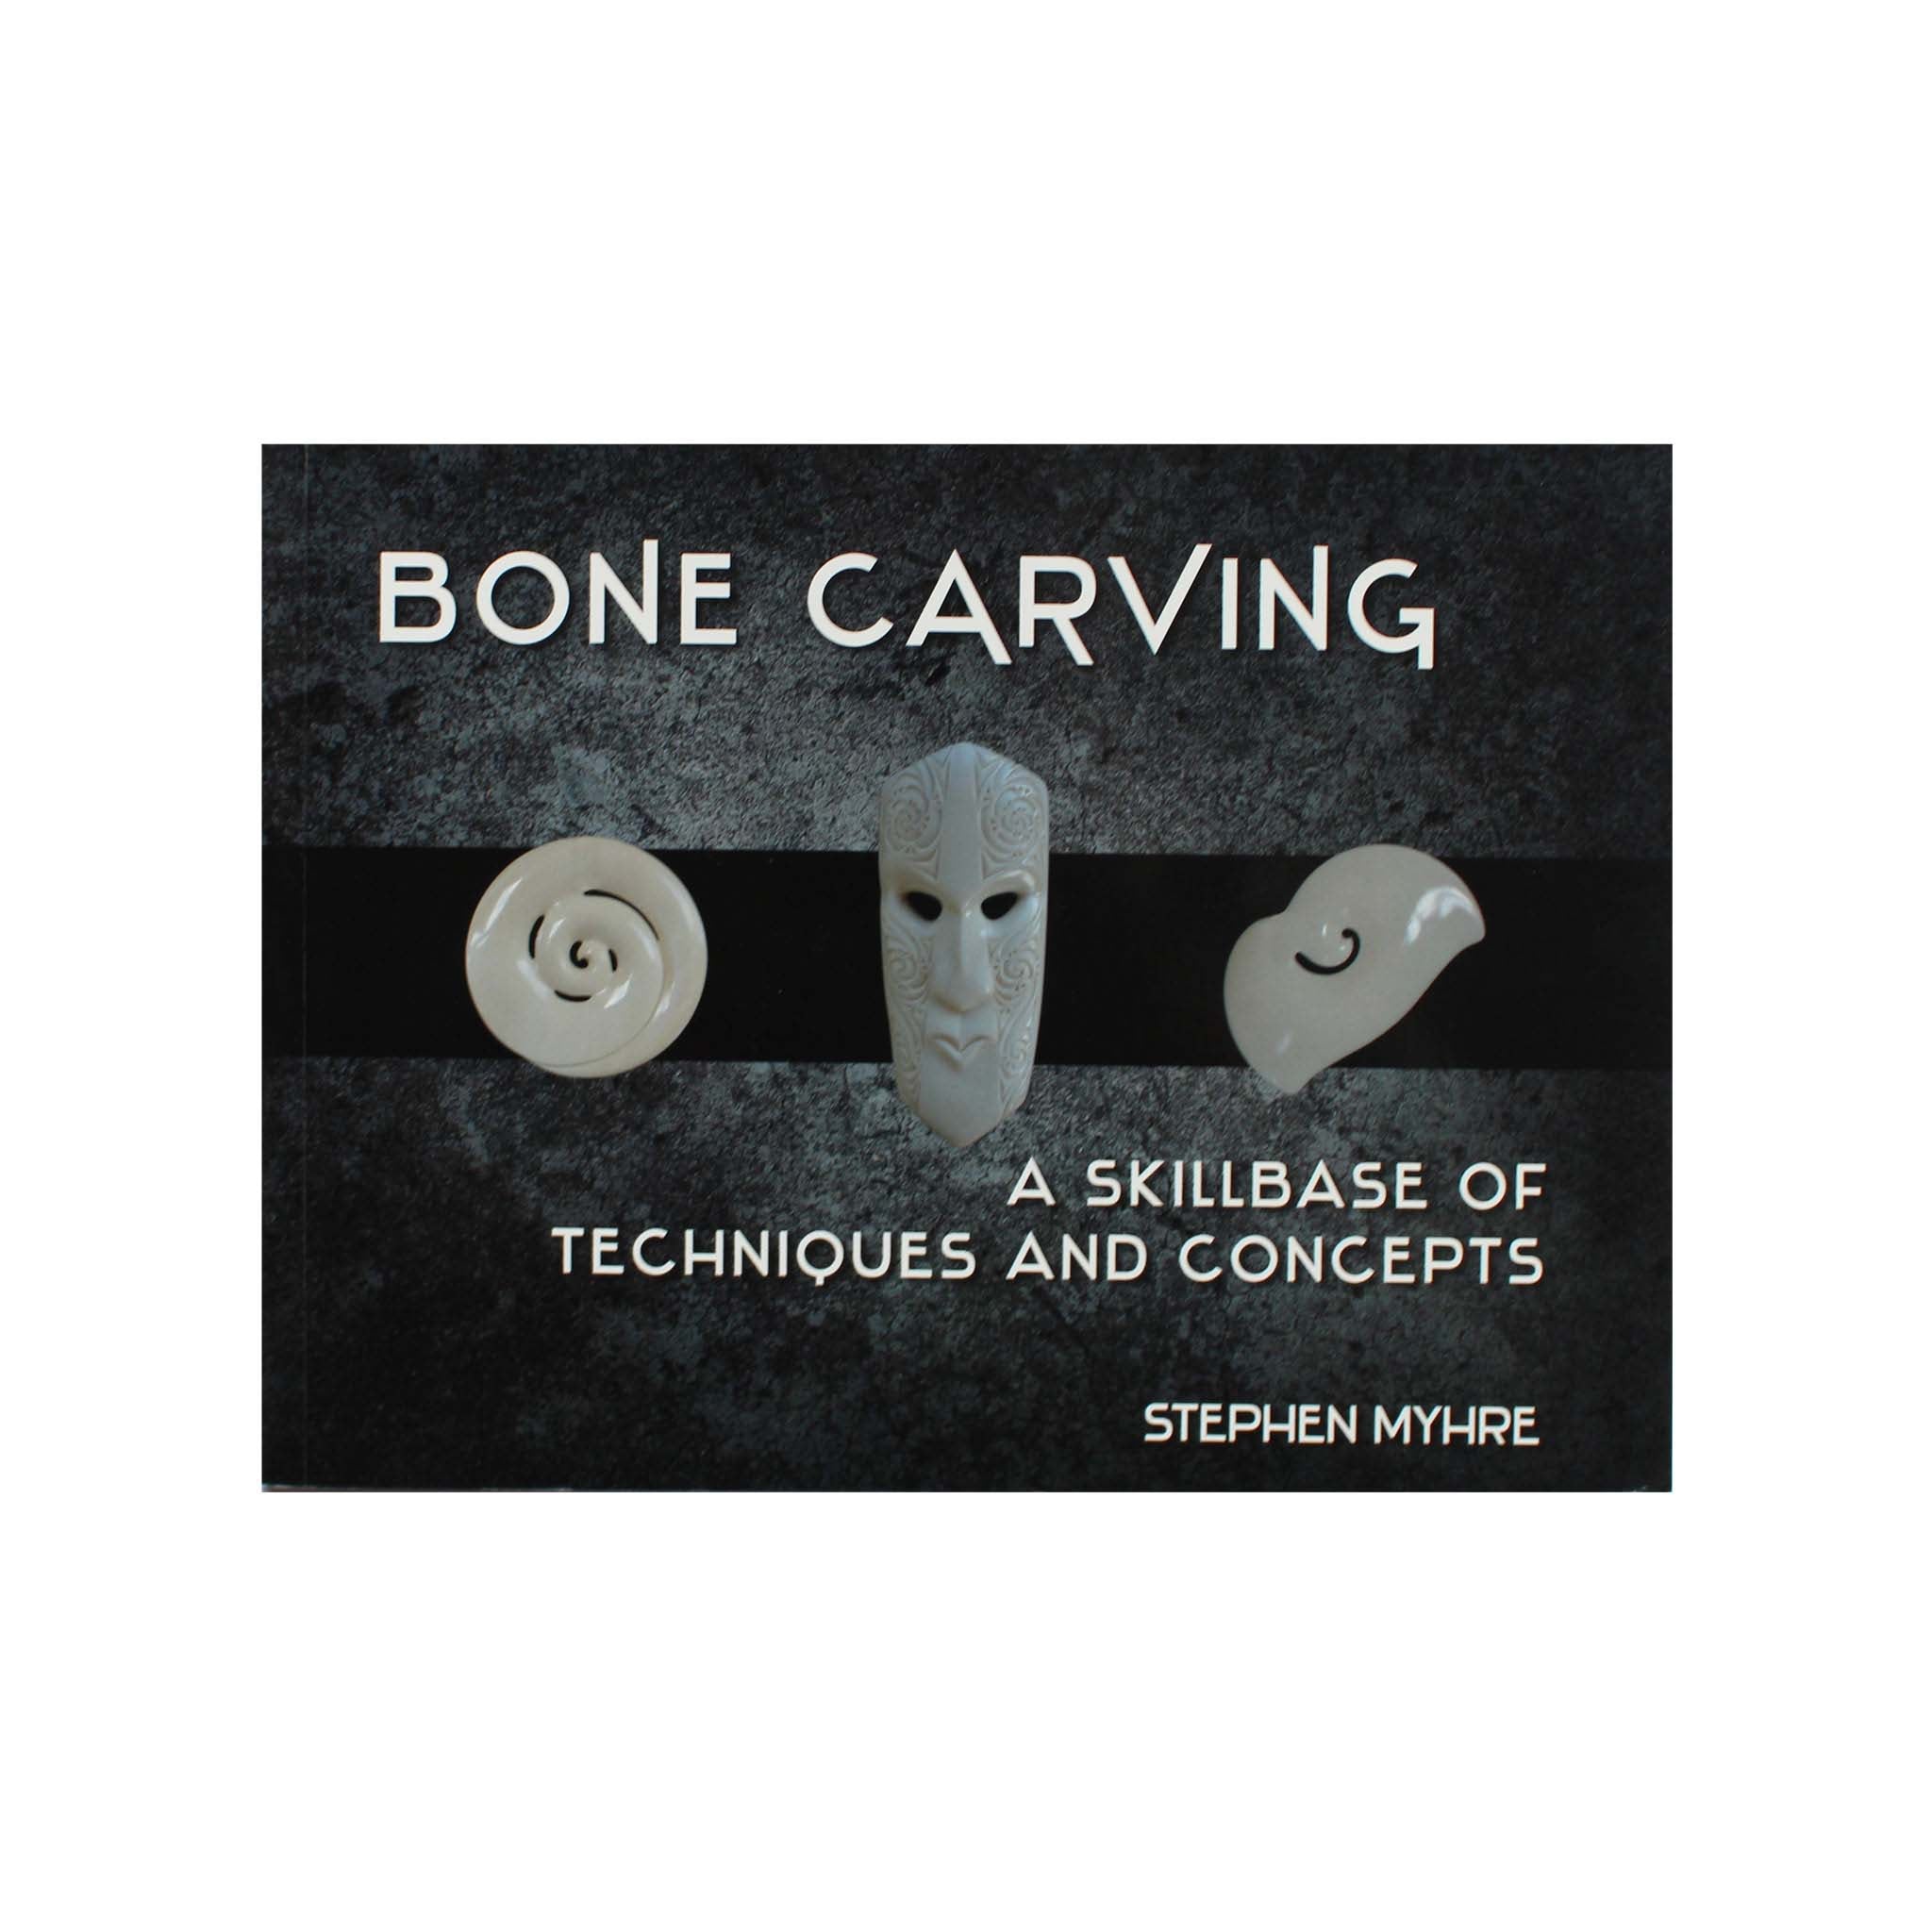 Bone Carving - A Skillbase of Techniques and Concepts